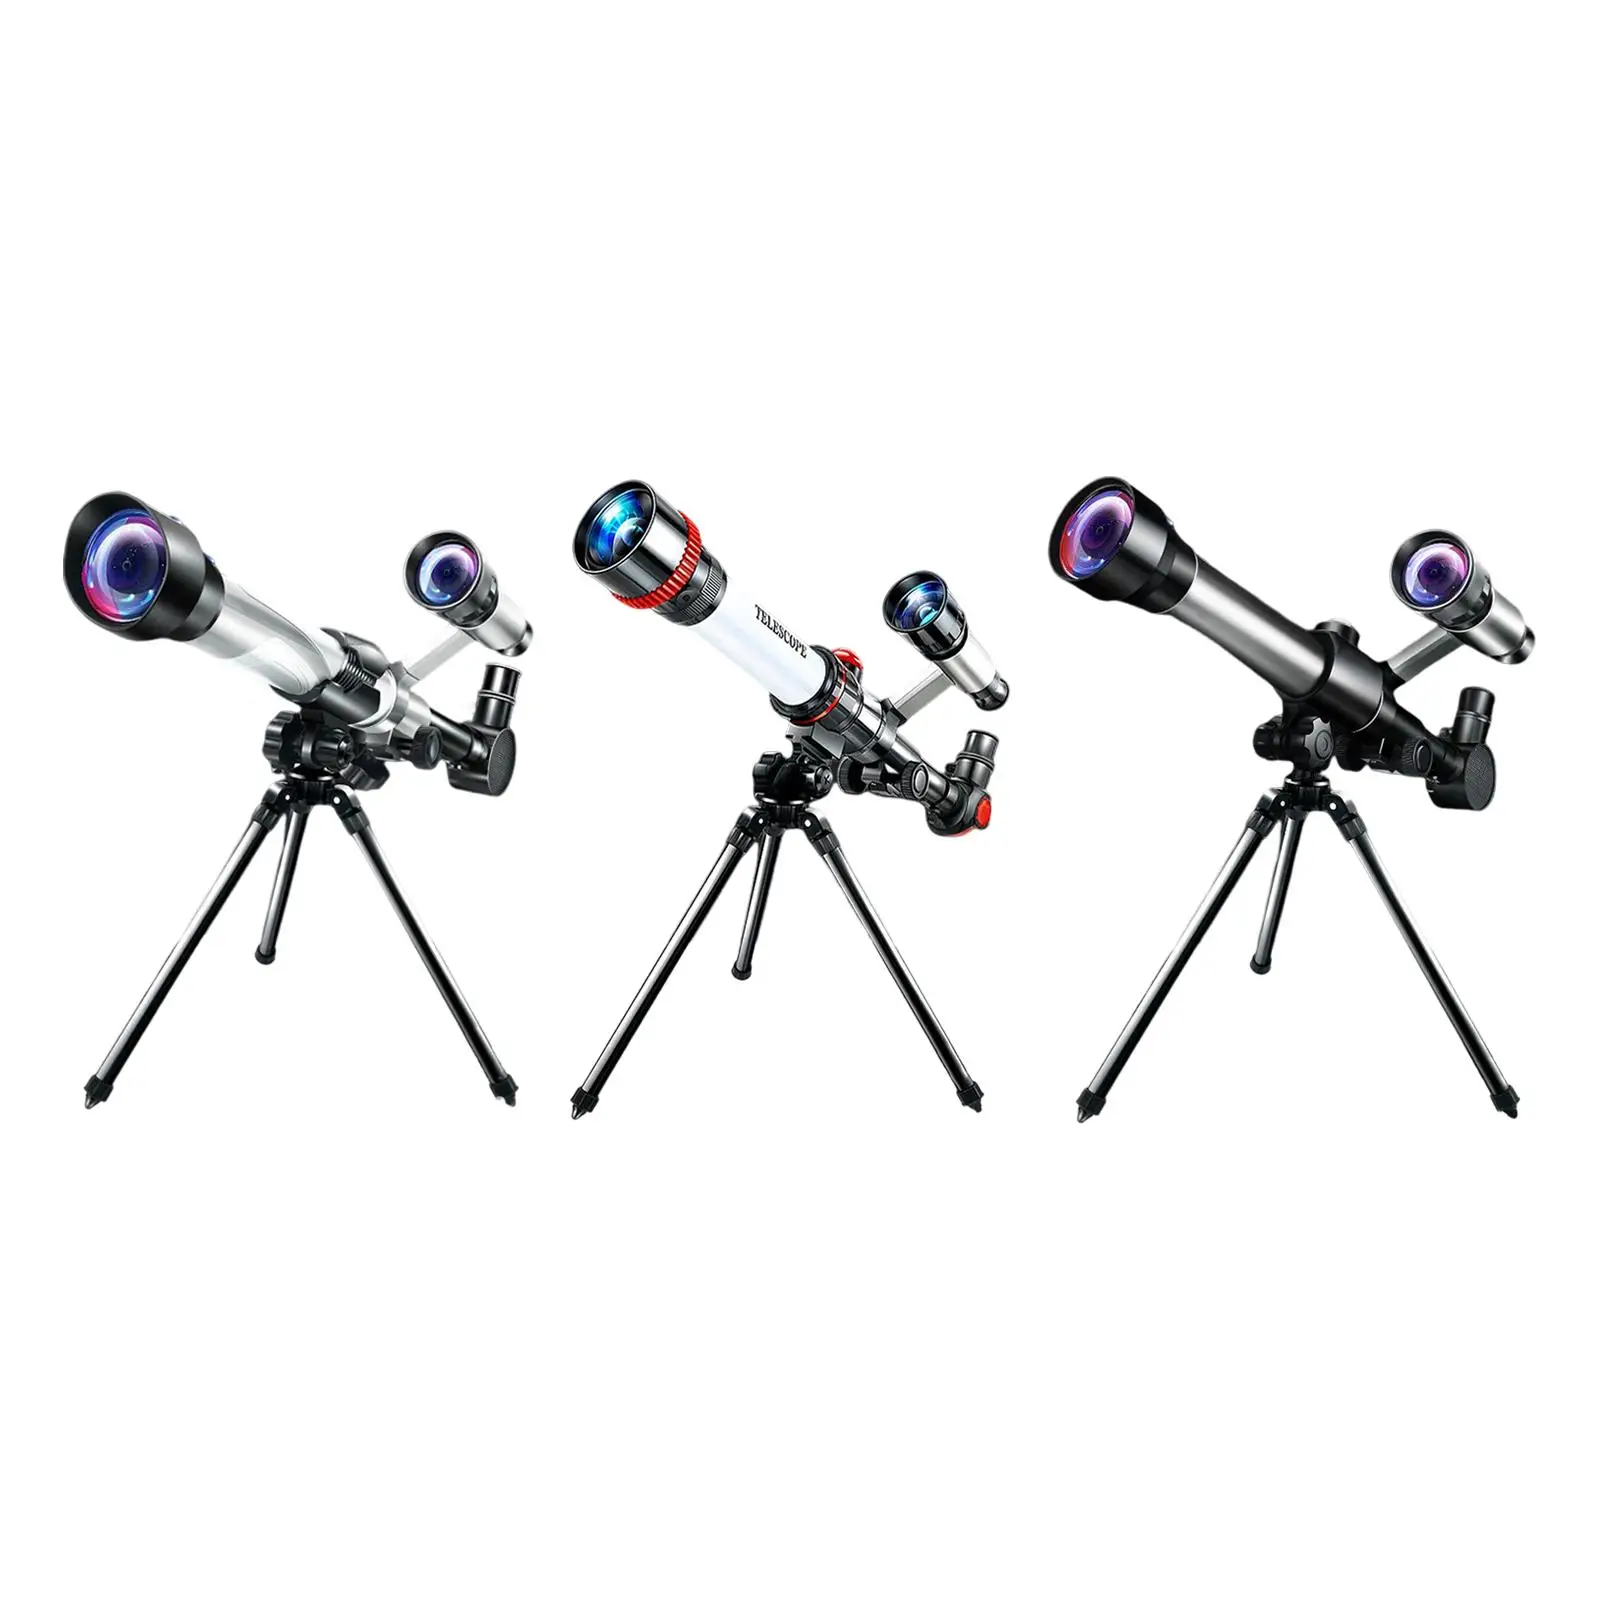 60mm Telescope with Tripod for Kids Astronomy Refractor Telescope